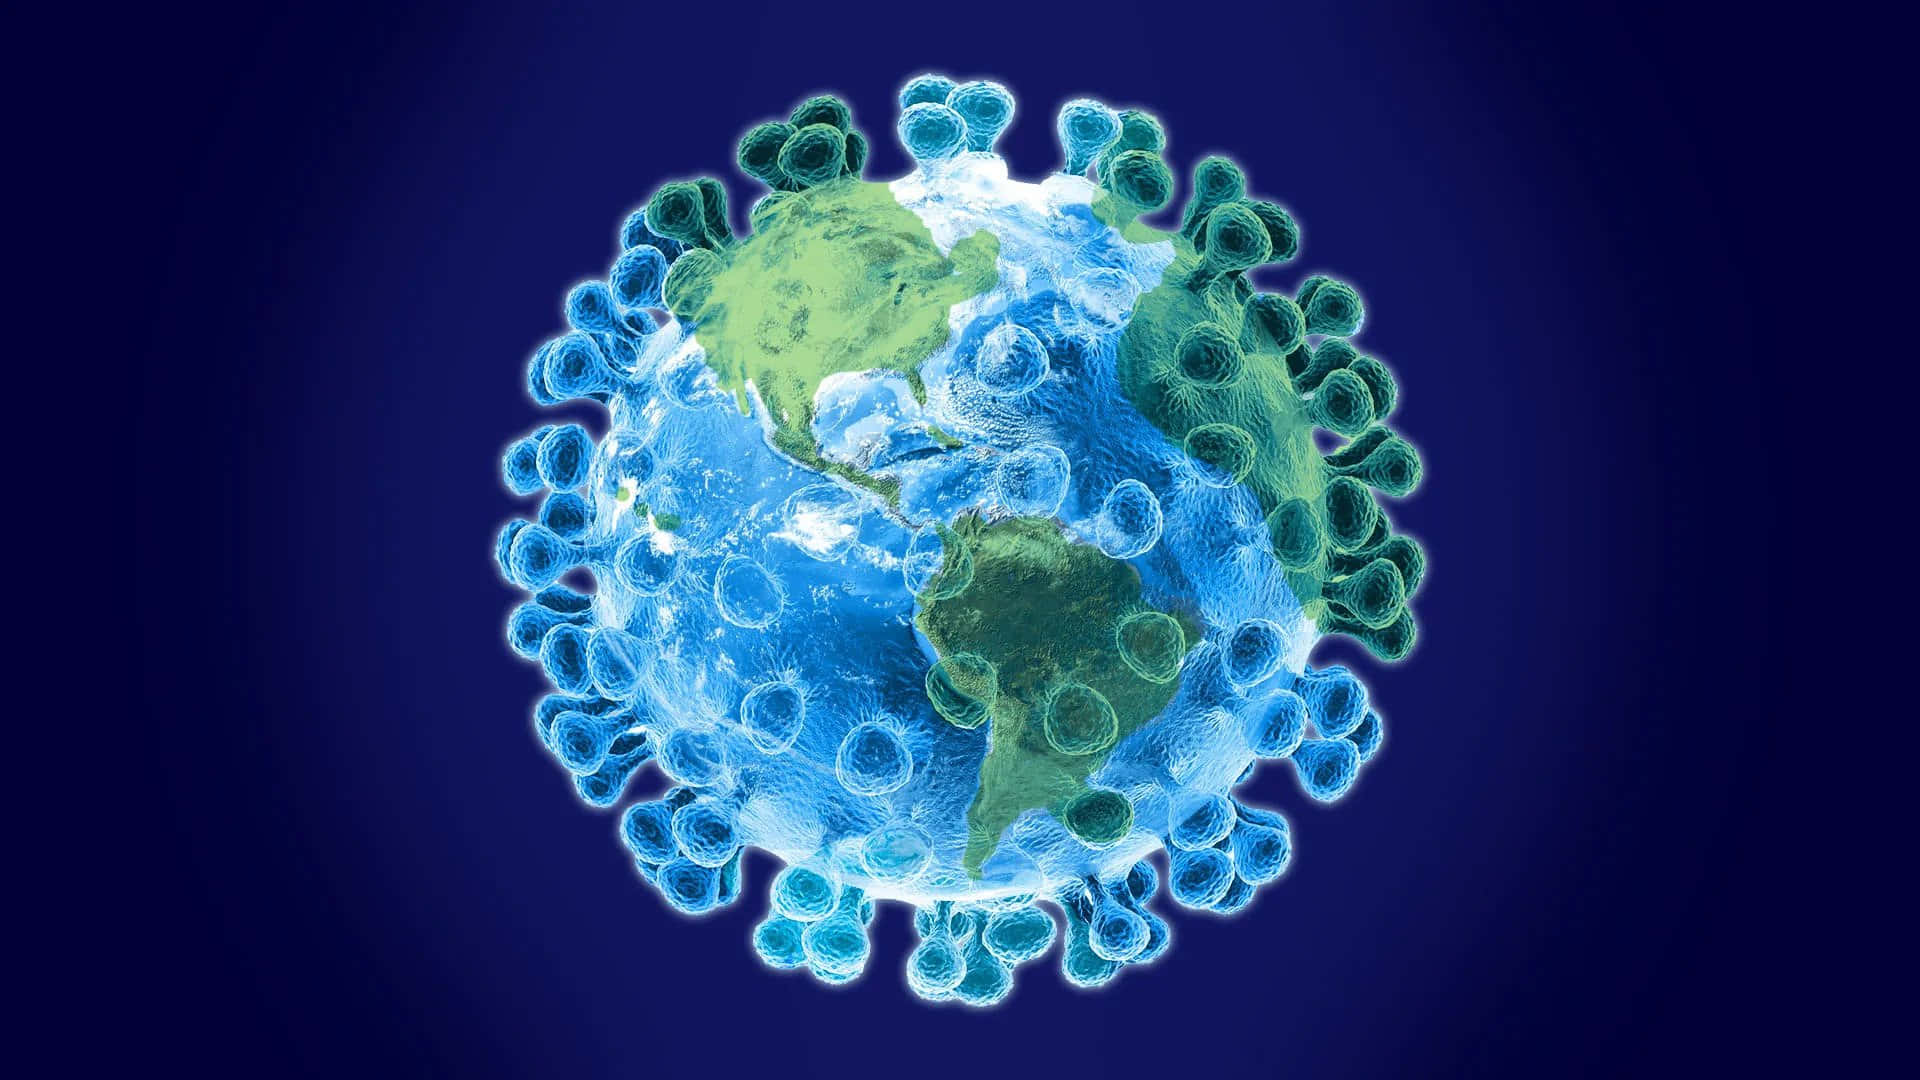 Coronavirus Image with Earth in the Background